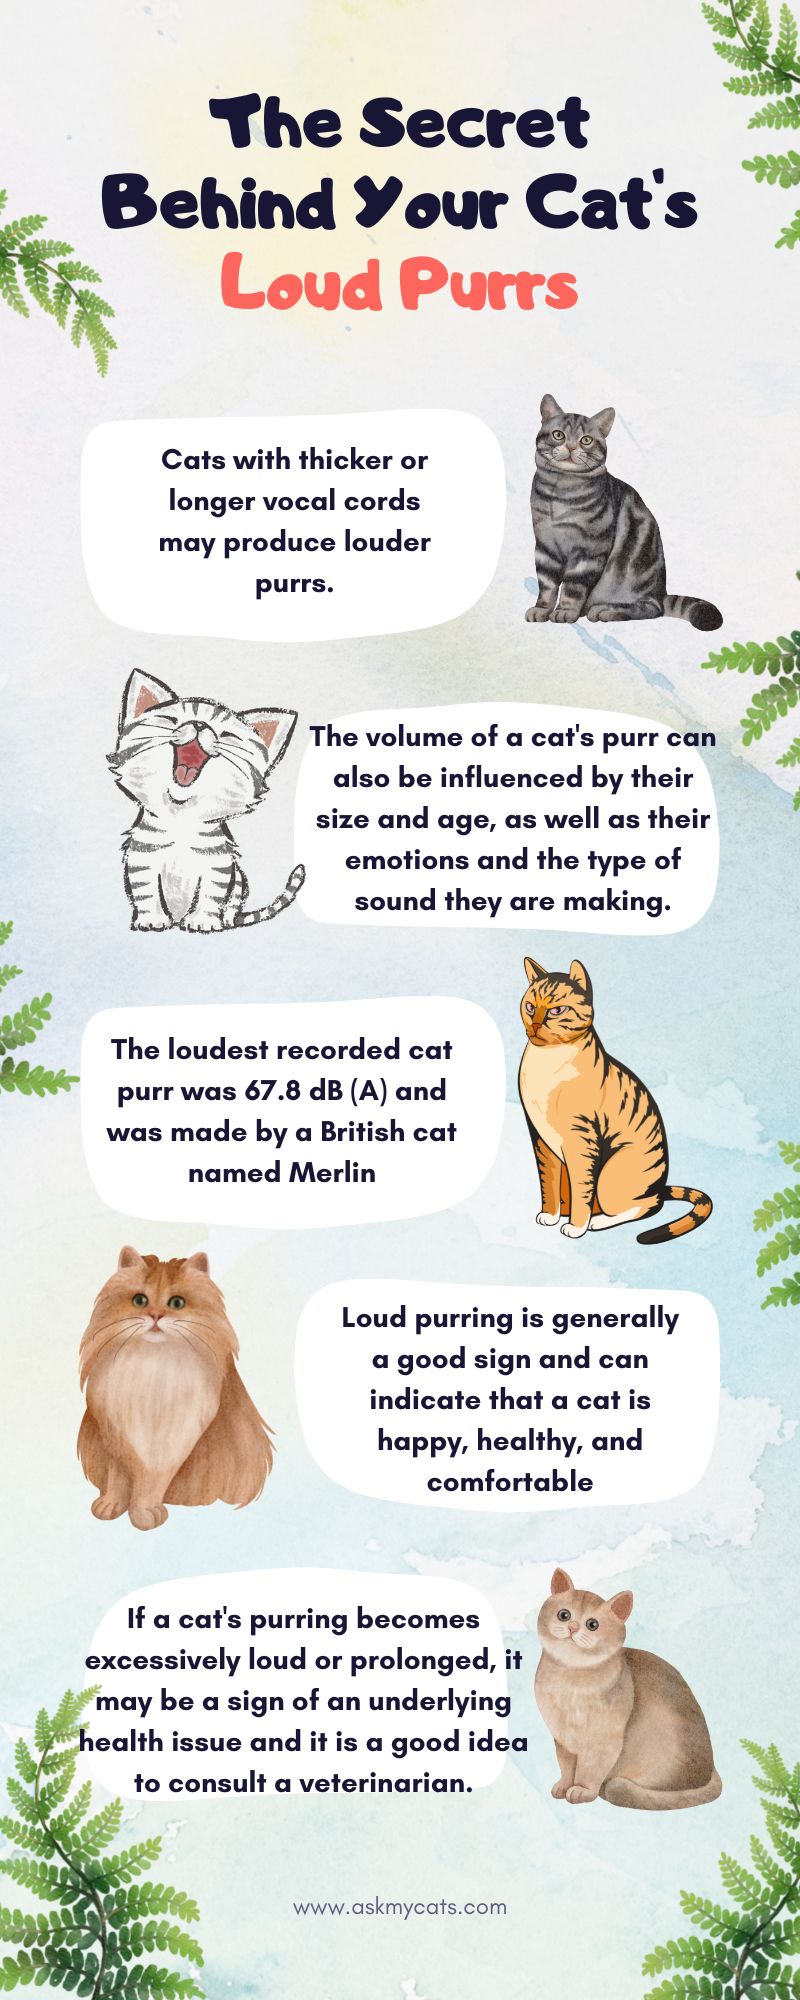 The Secret Behind Your Cats Loud Purrs